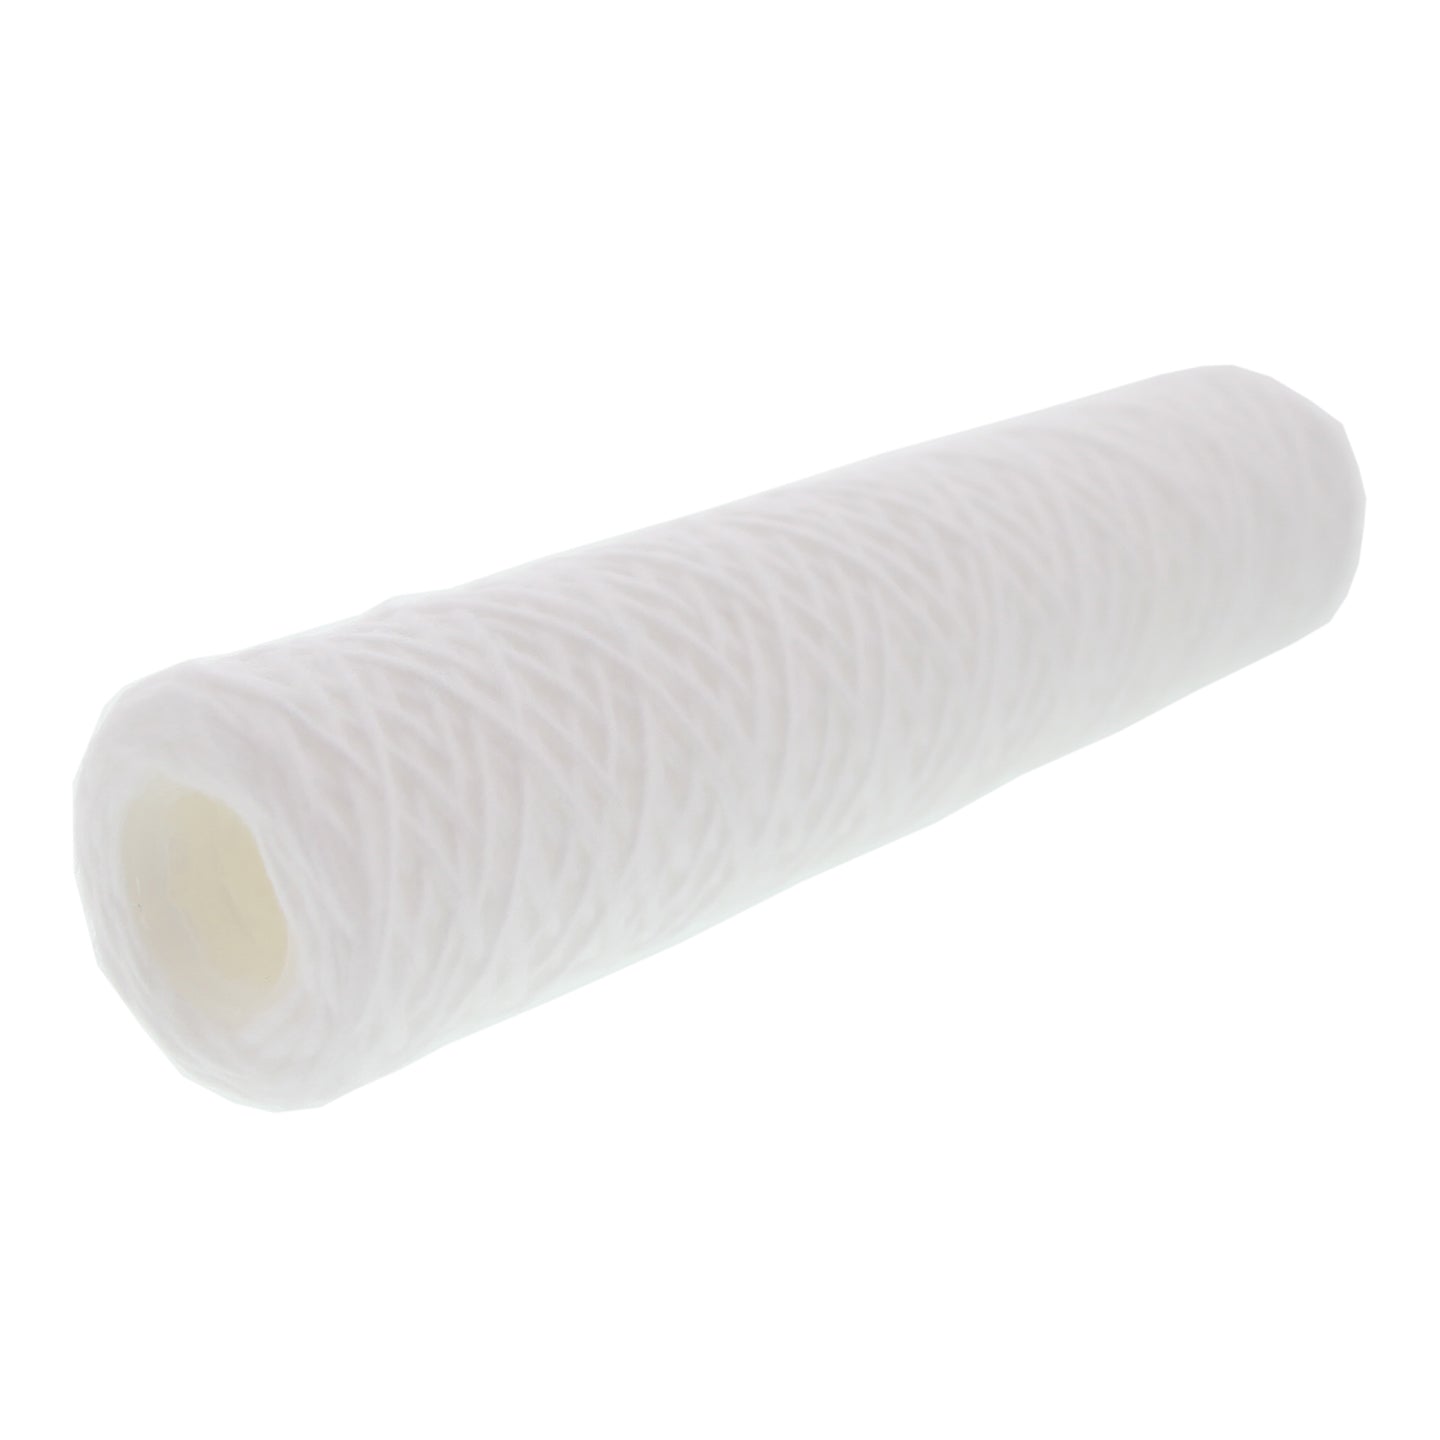 Pentek WP5 String-Wound Water Filters (9-7/8-inch x 2-1/4-inch) (Side Two Top View)